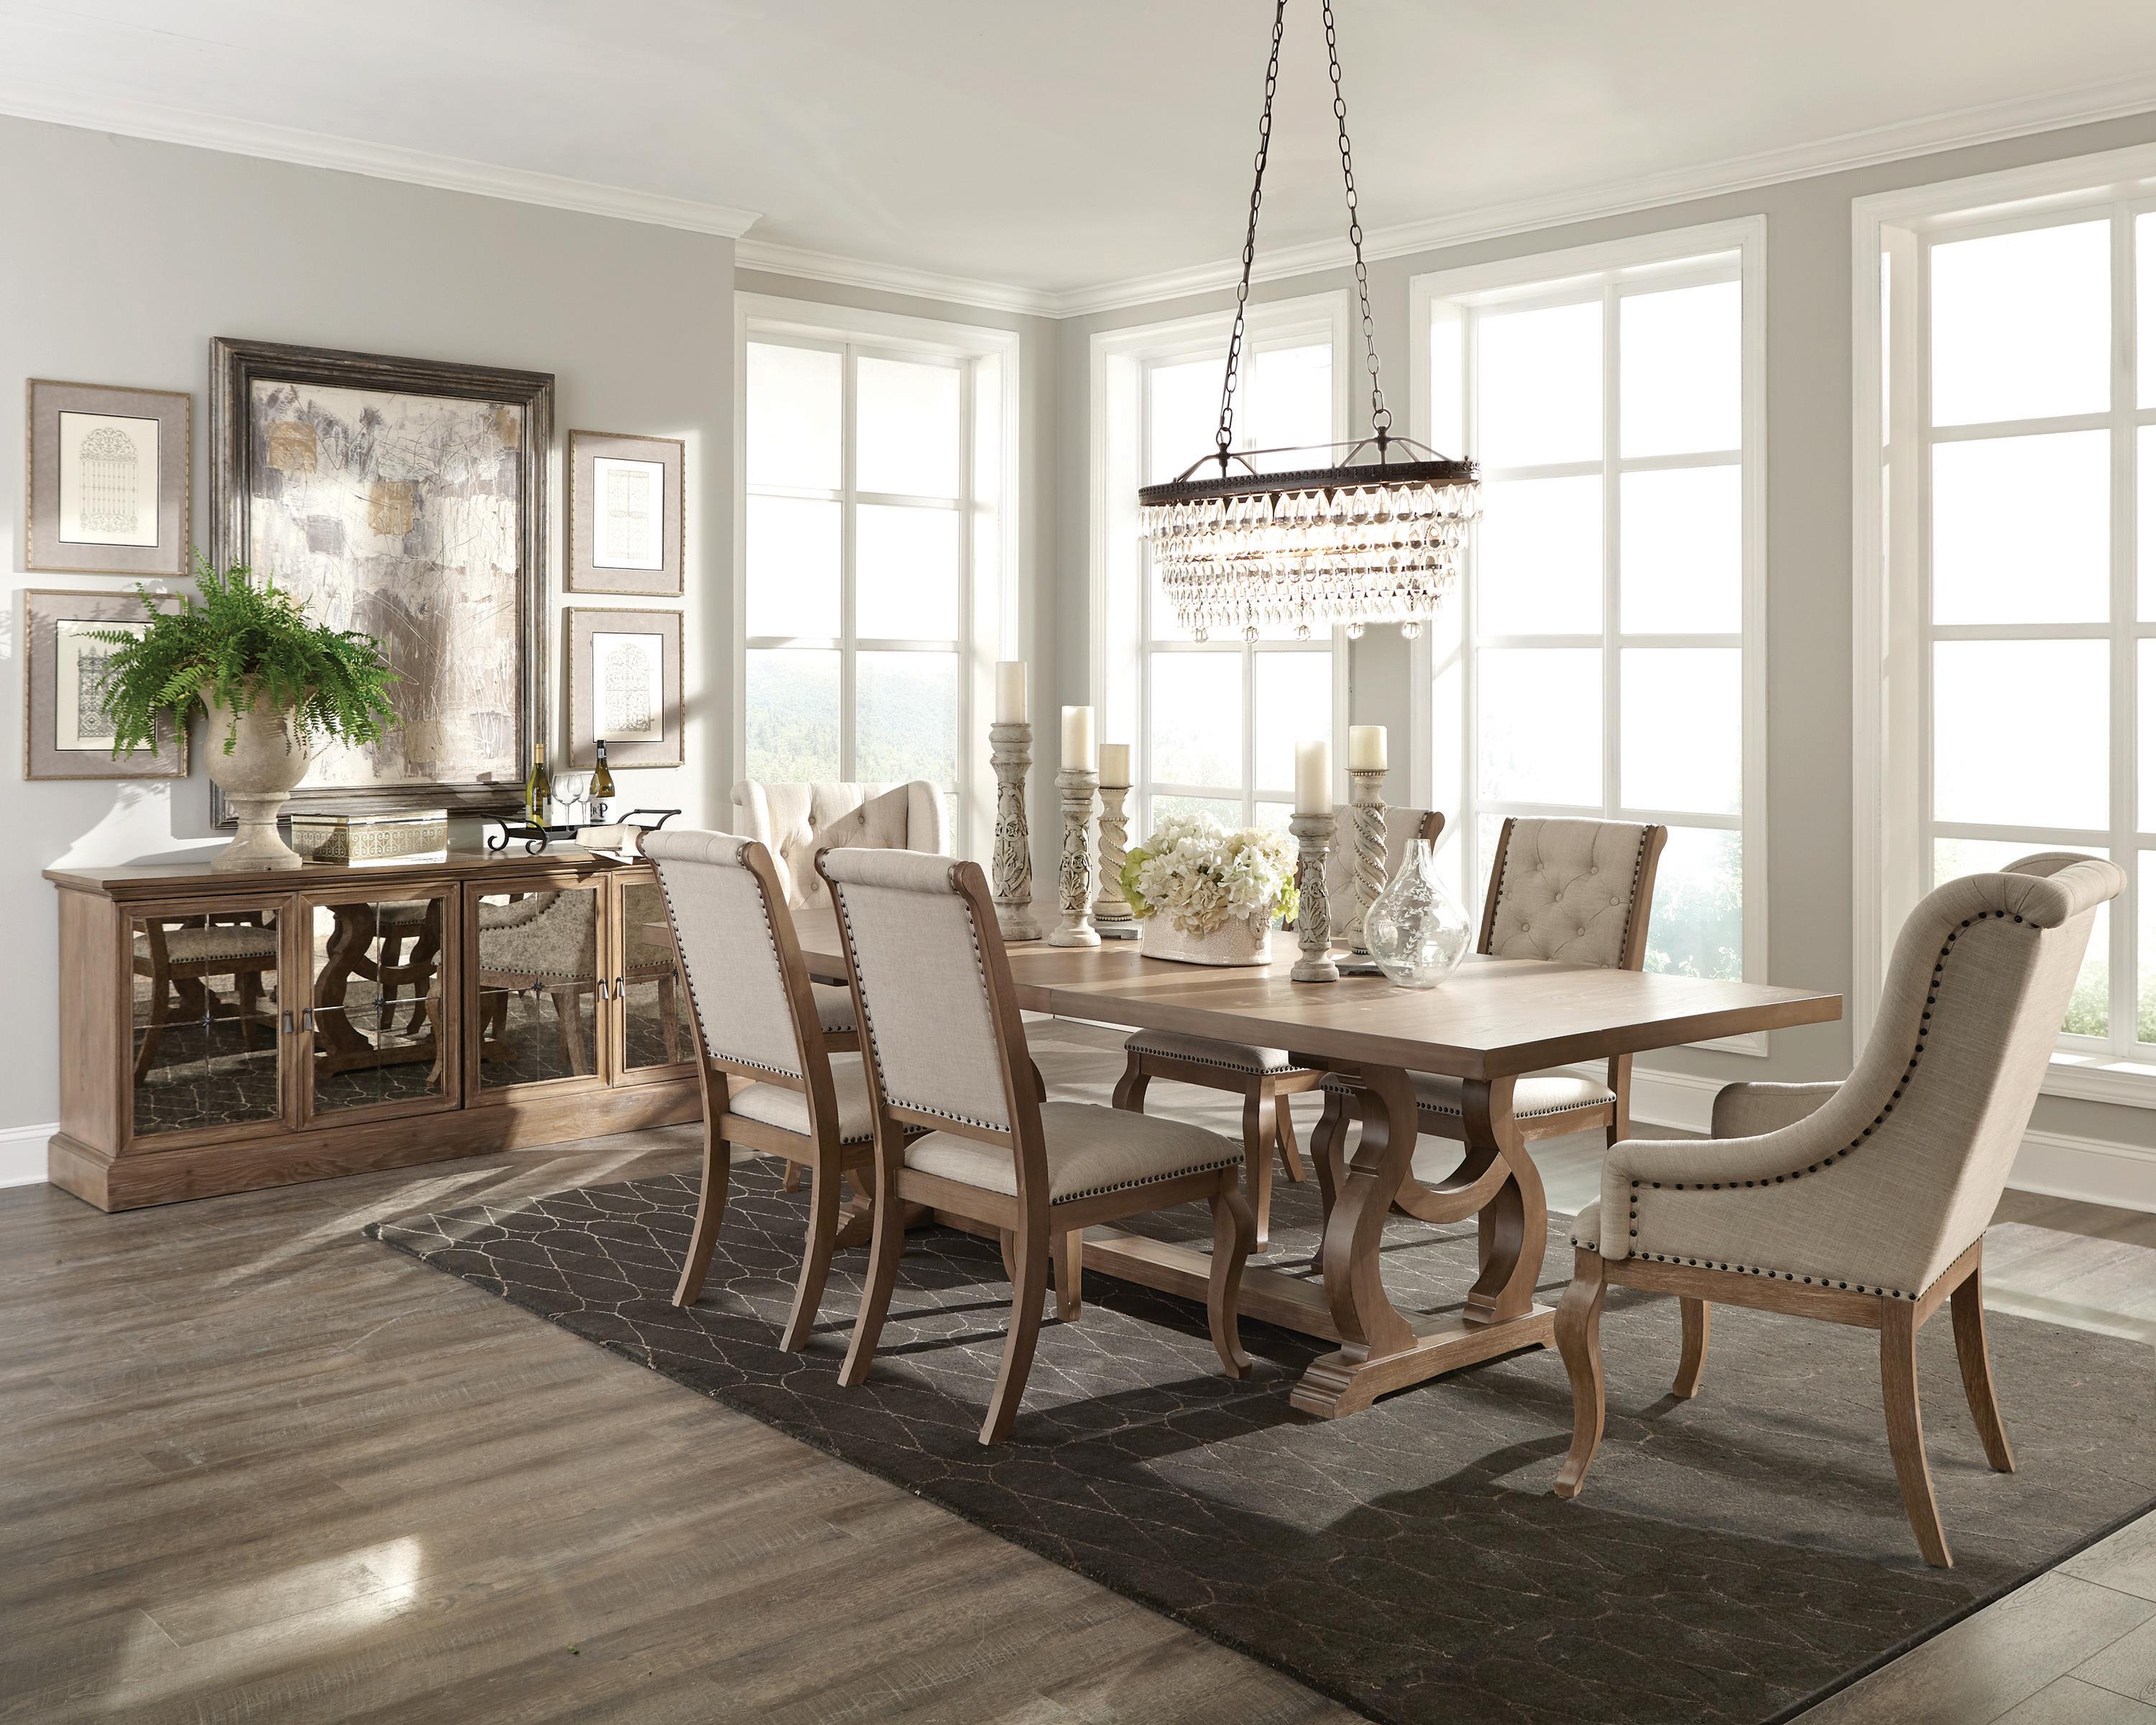 Transitional Dining Room Set 110291-S5 Brockway 110291-S5 in Brown Fabric